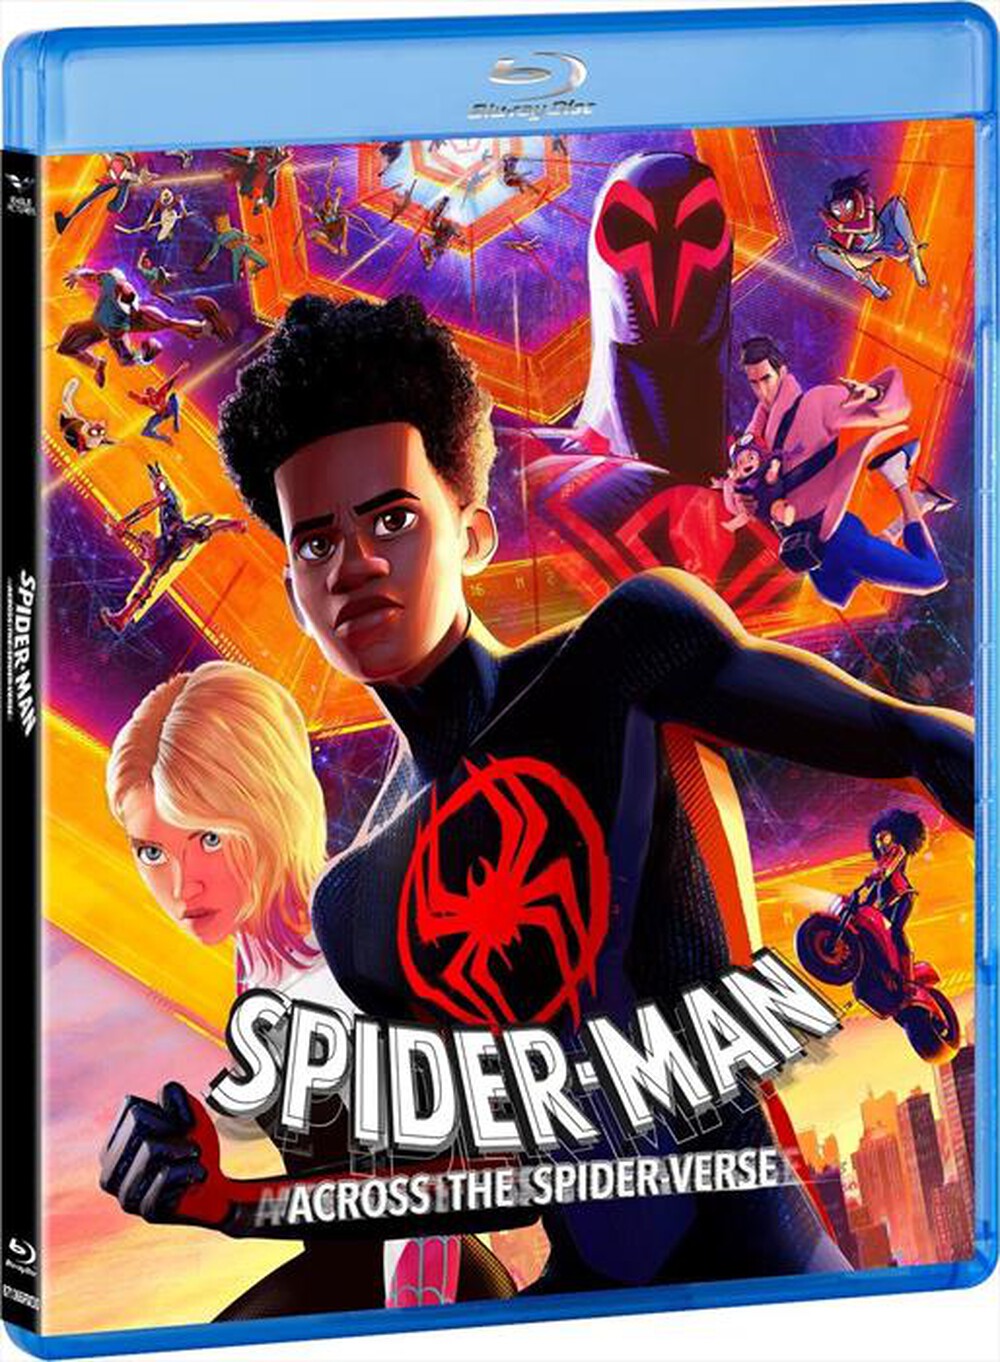 "SONY PICTURES - Spider-Man: Across The Spider-Verse (Blu-Ray+Car"